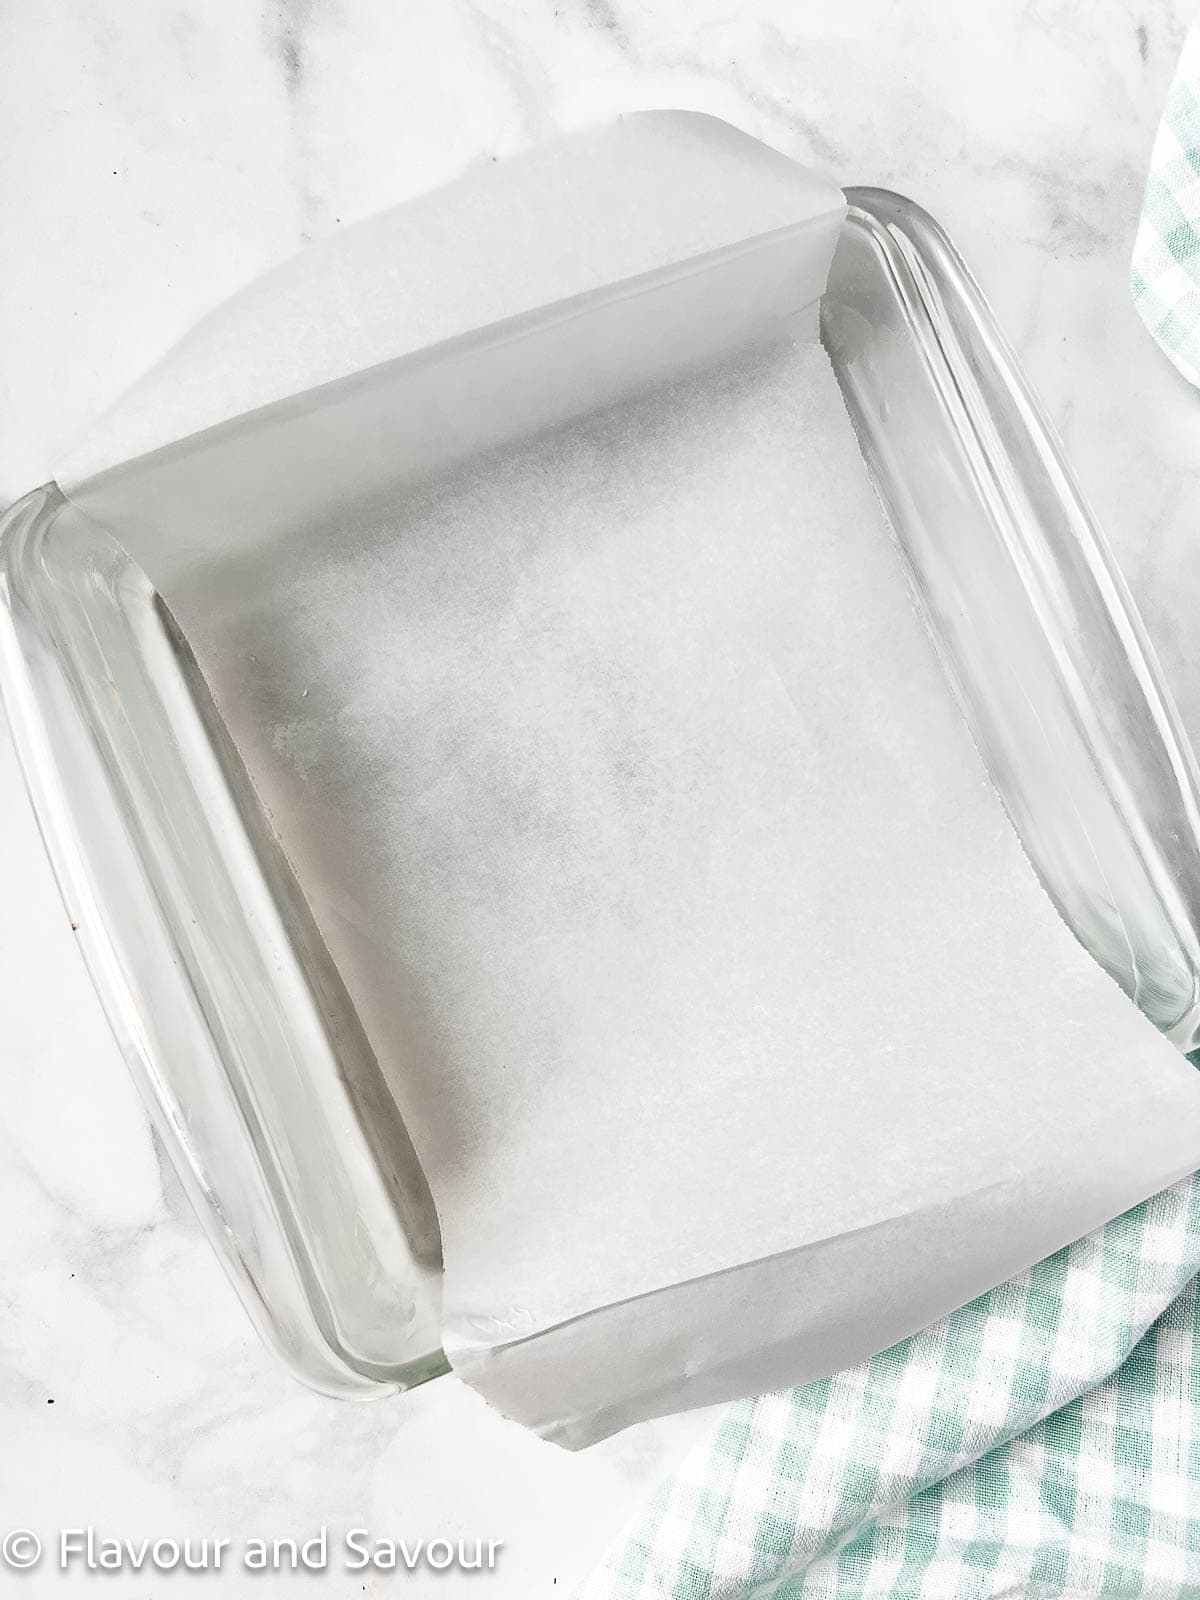 An 8-inch square glass baking pan lined with parchment paper.